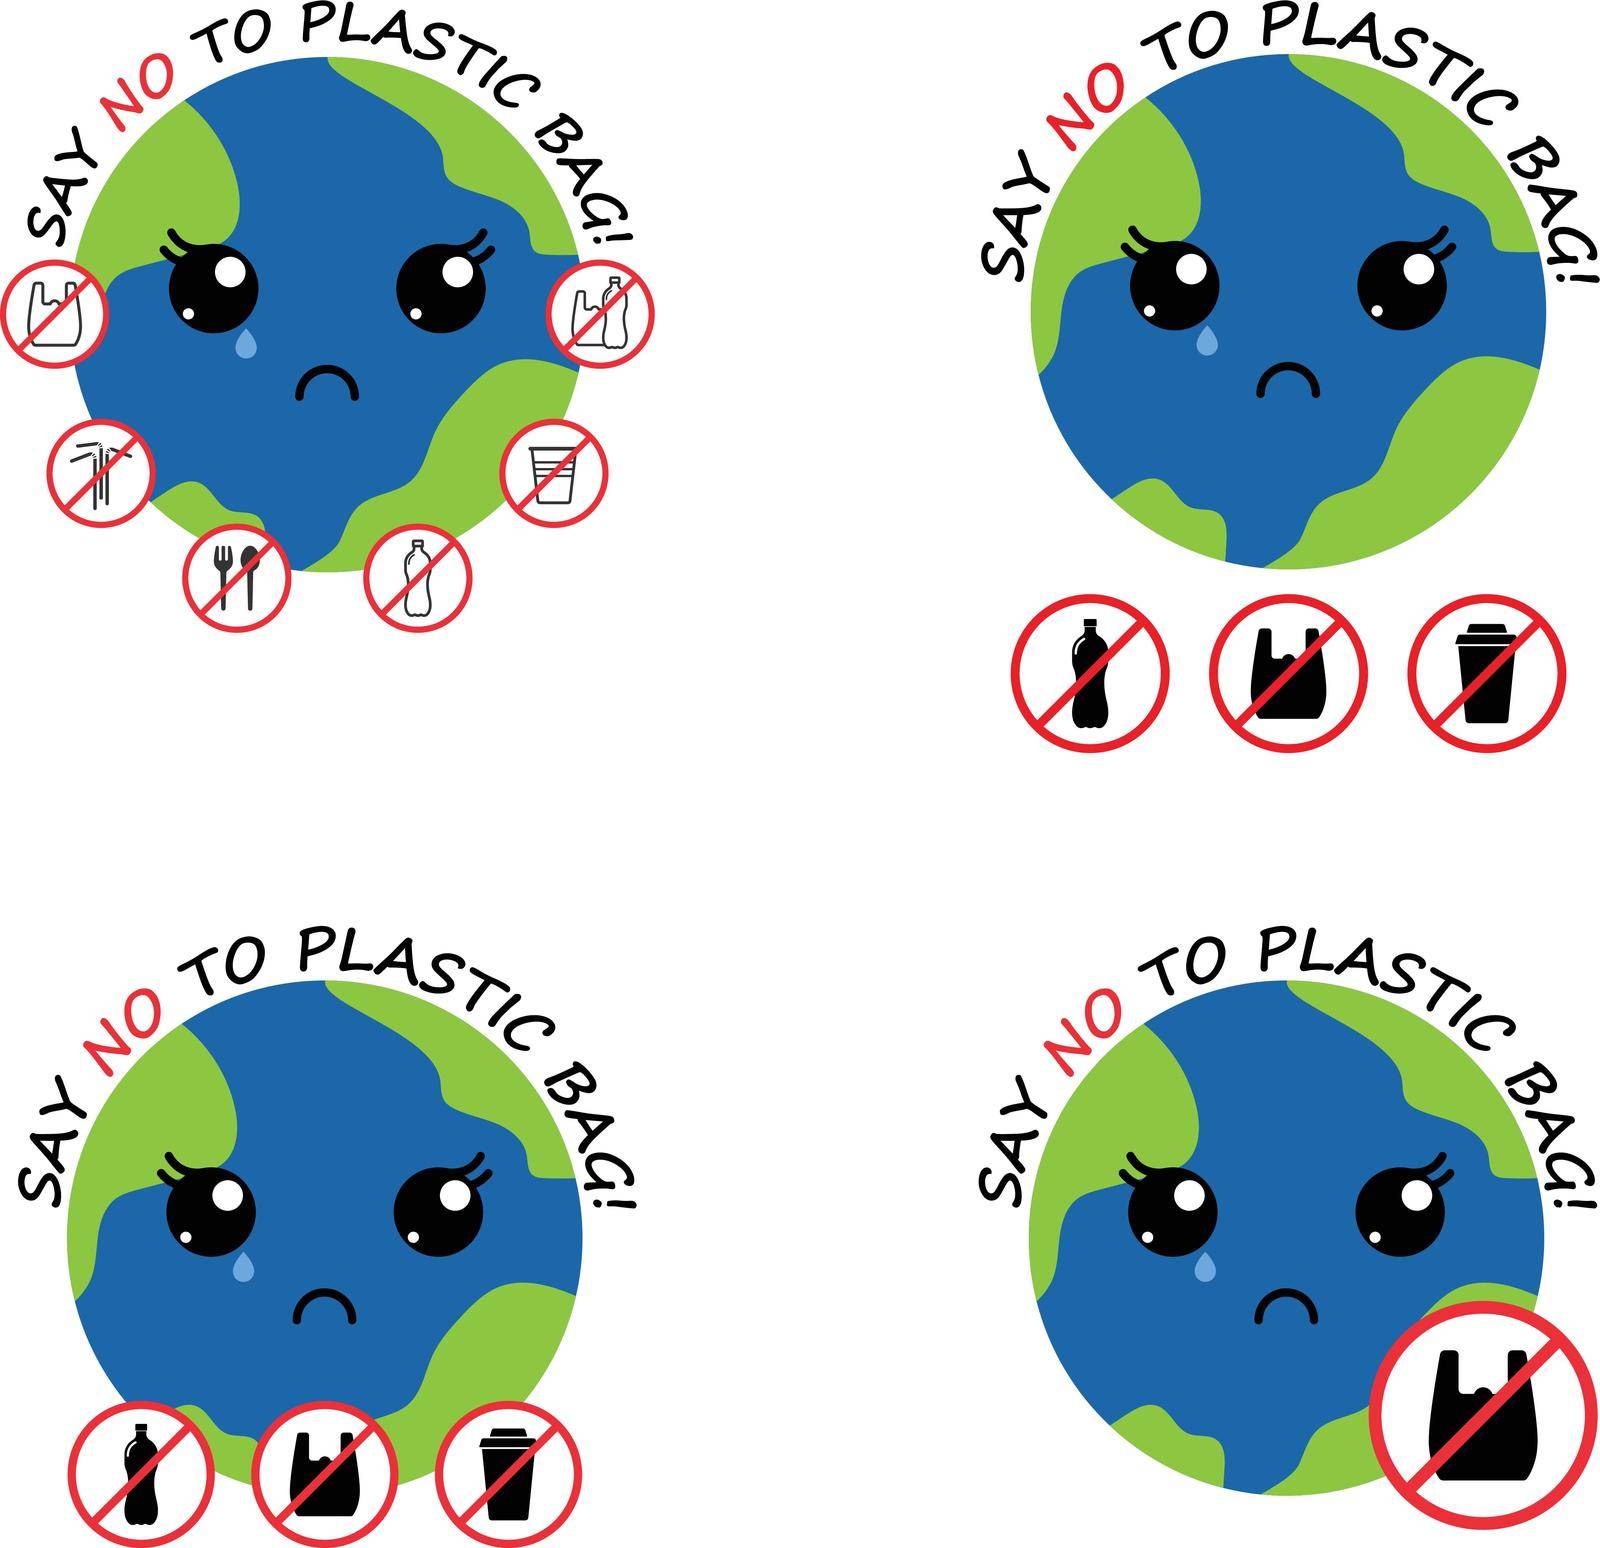 crying mother planet earth with cute kawaii black eyes, red prohibition sign and lettering. say no to plastic bag. save environment and ecology of earth. go green eco friendly environment concept.